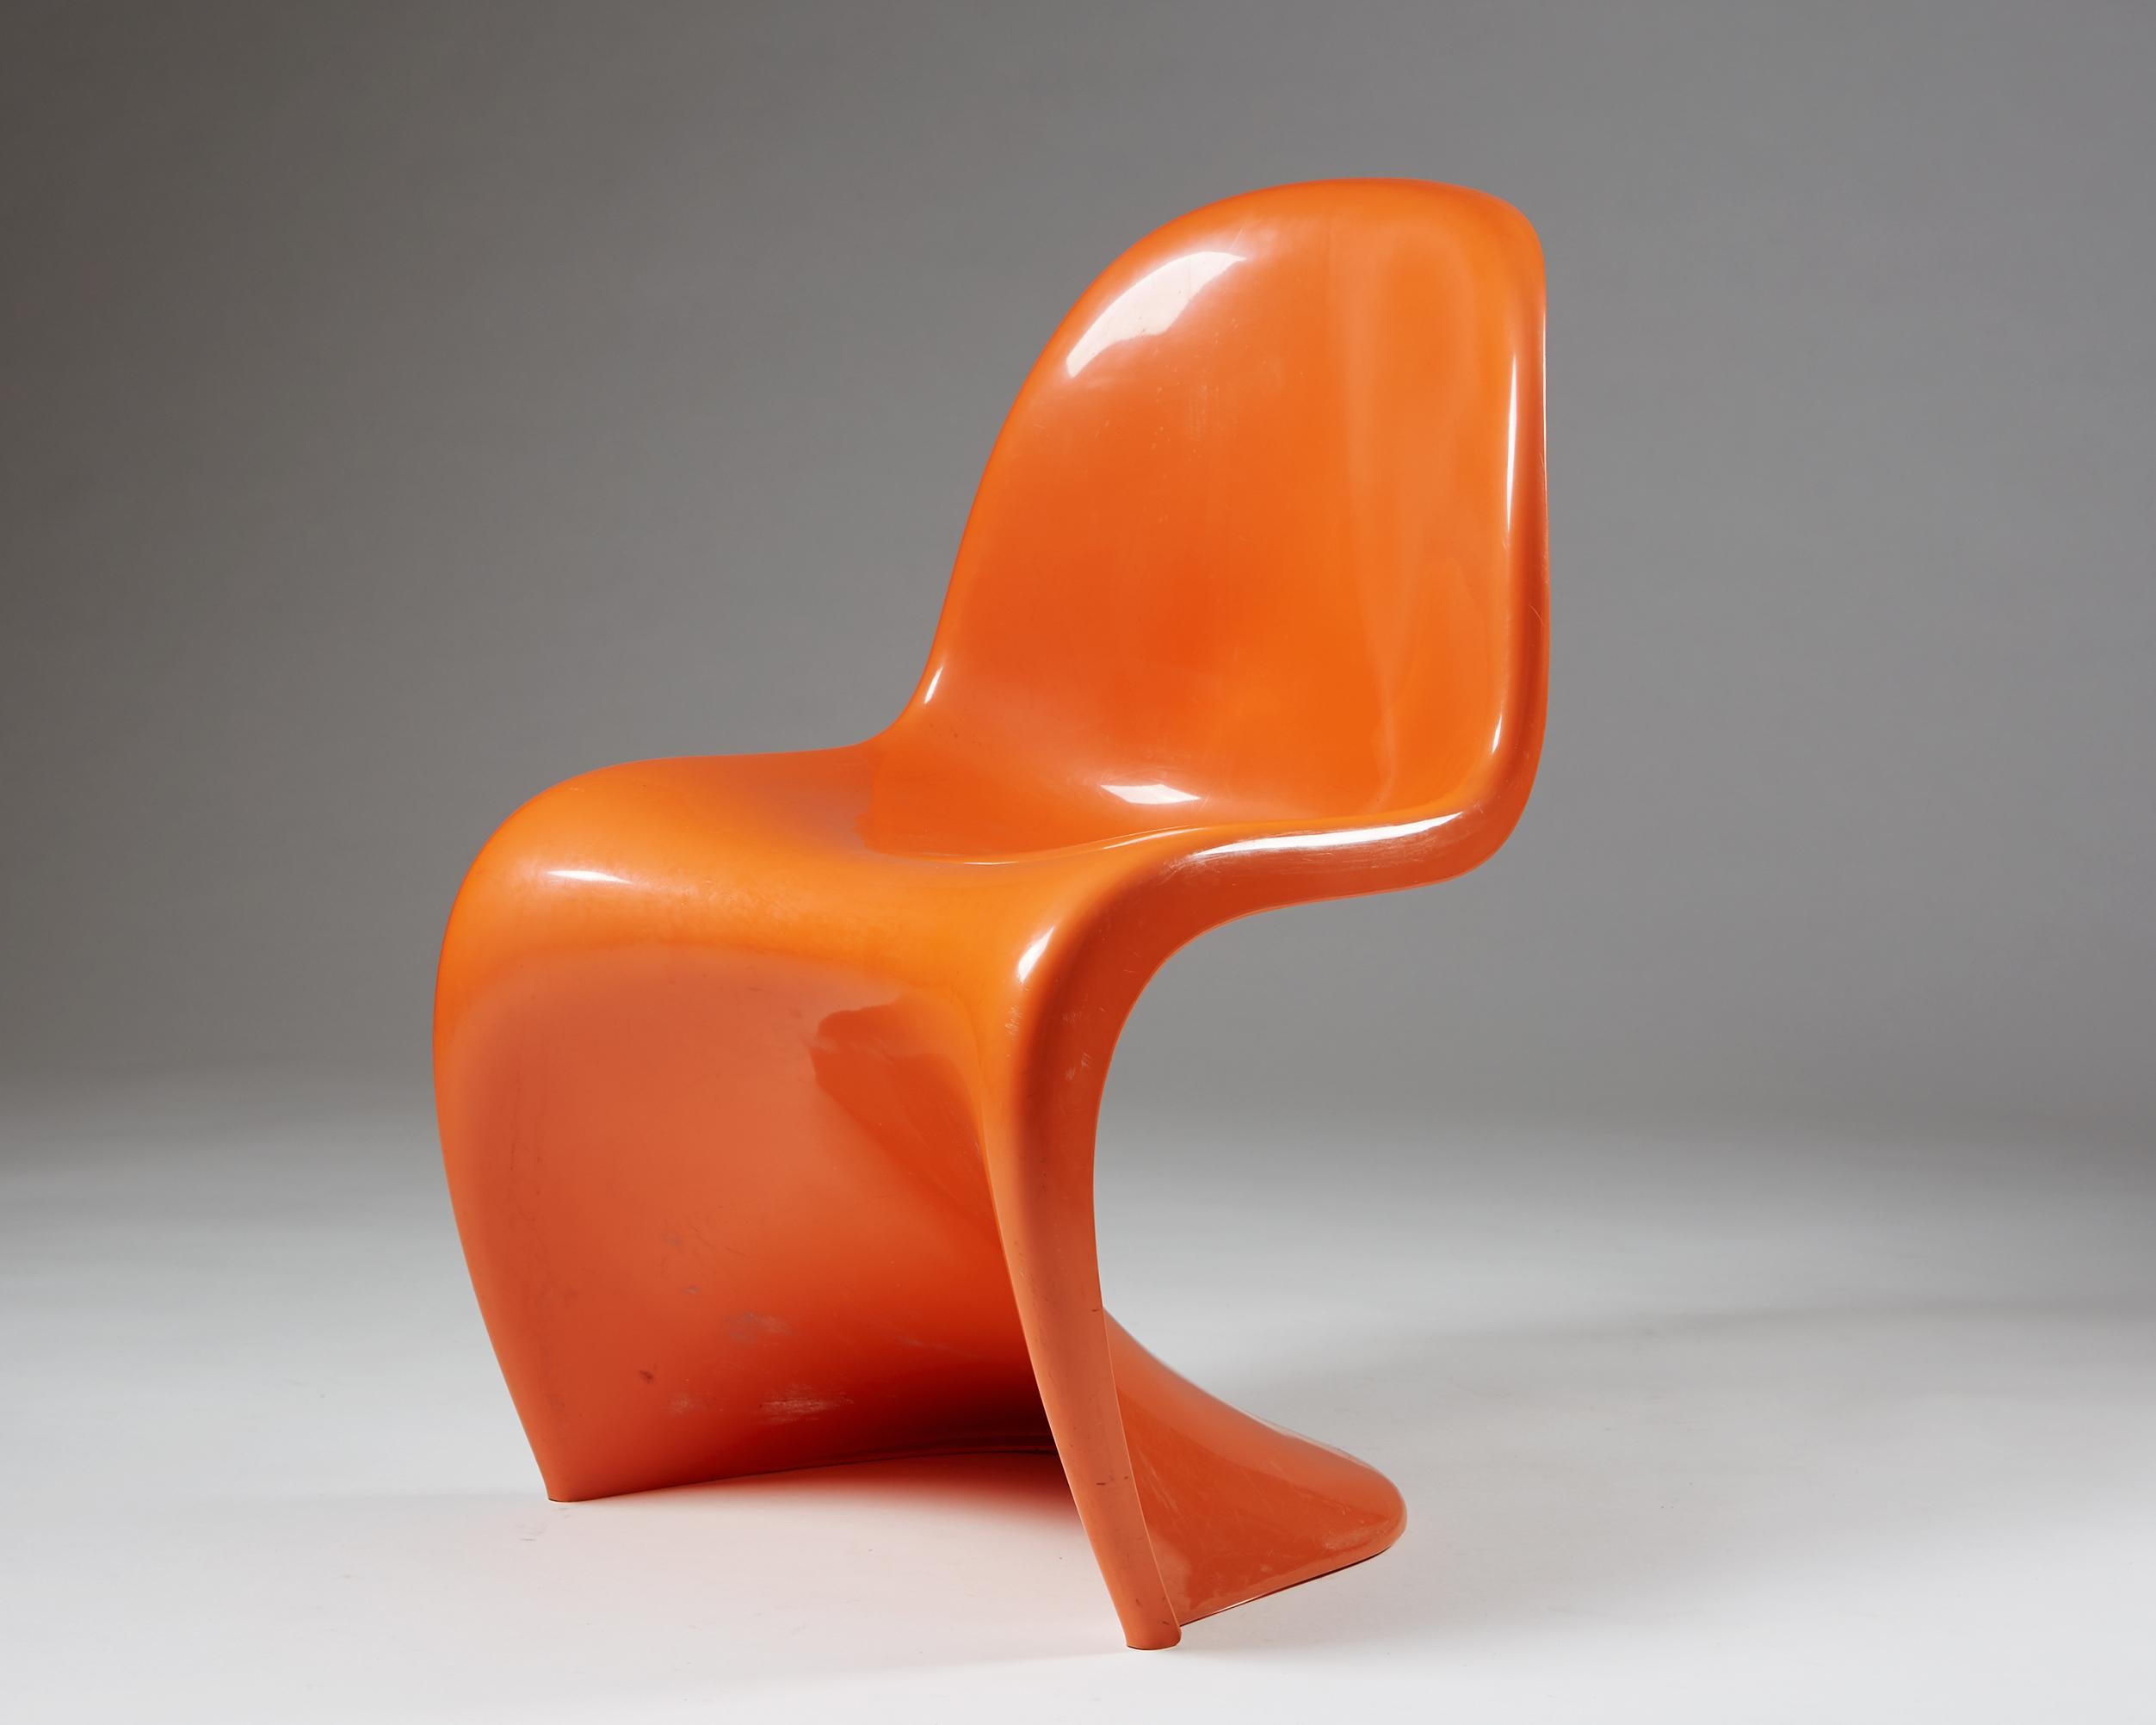 Pair of chairs designed by Verner Panton for Herman Miller, USA, 1960s. ABS plastic. Sold as a set.

Measures: H 83cm/ 32 1/2